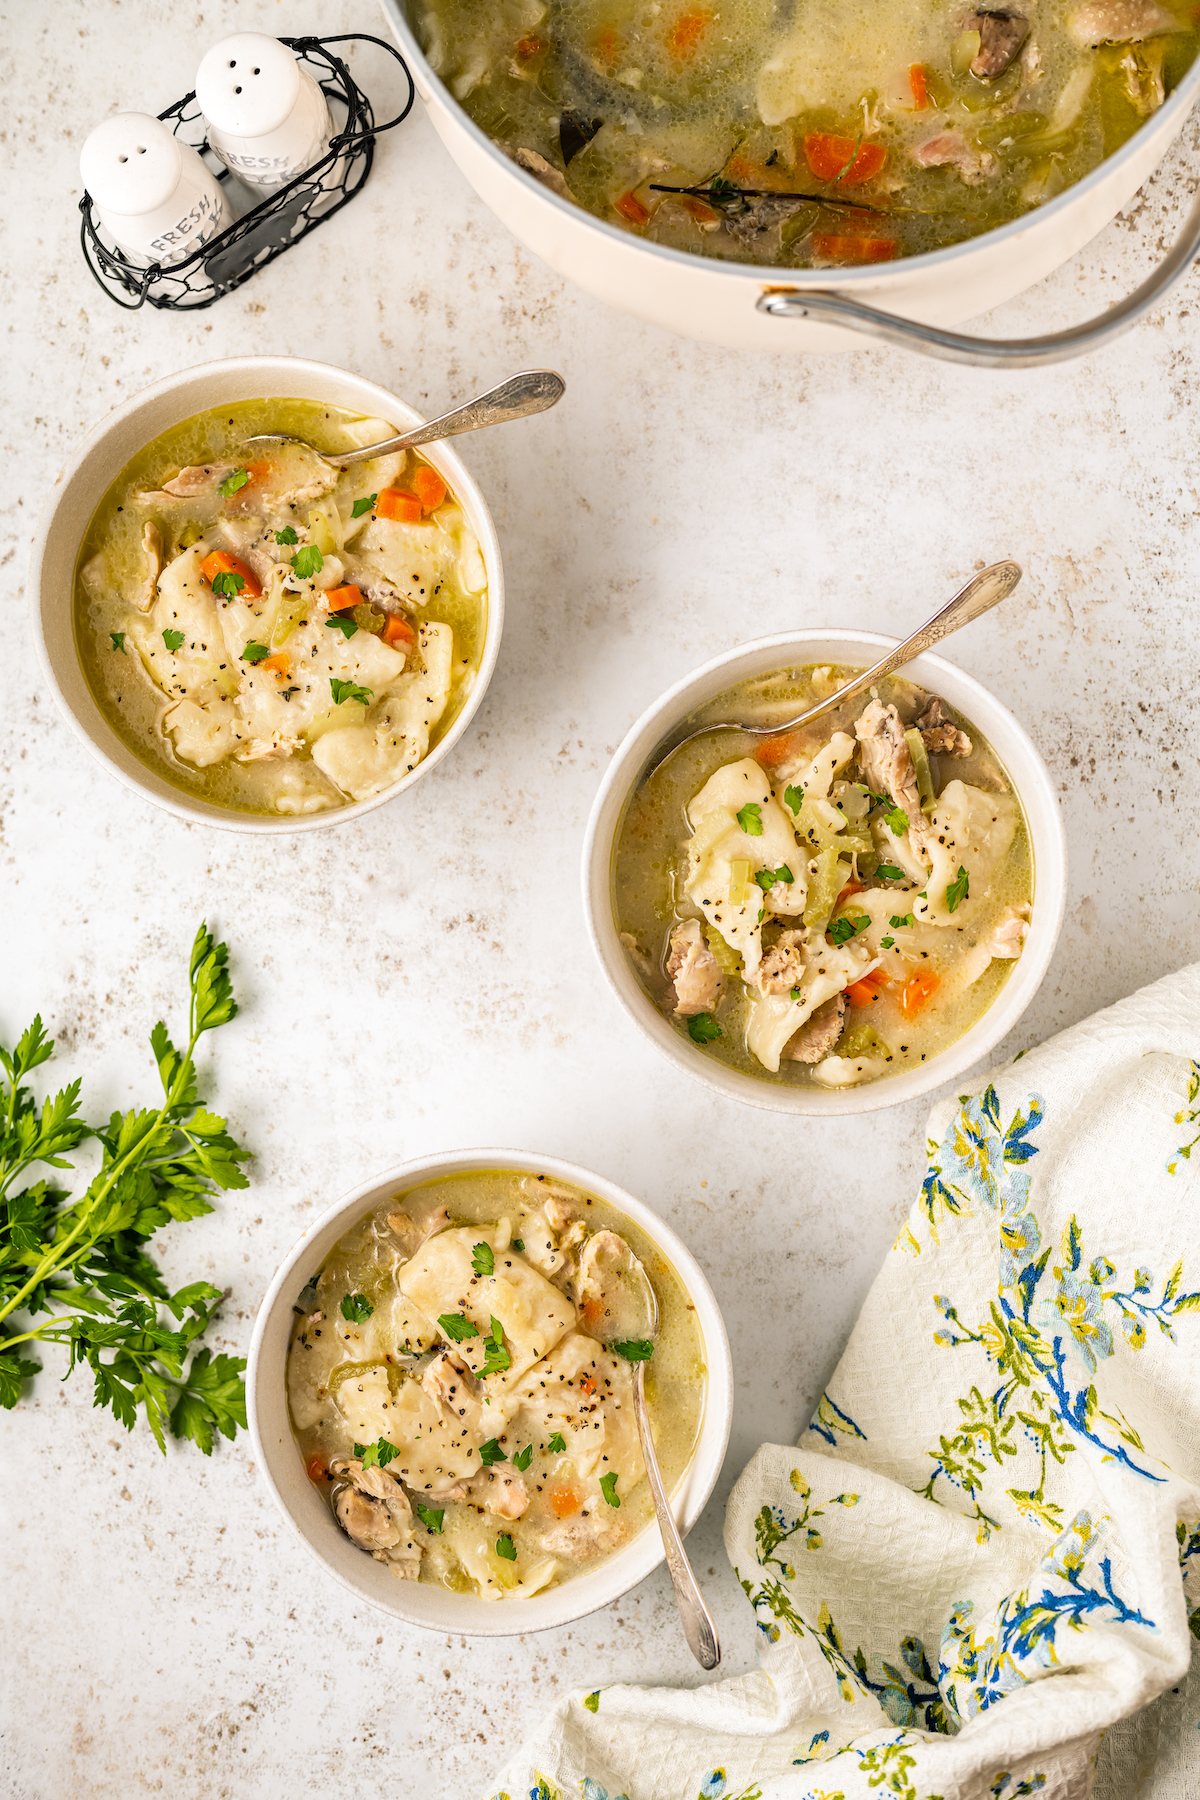 Three bowls of southern style chicken and dumplings on a table with fresh herbs and a cloth napkin.